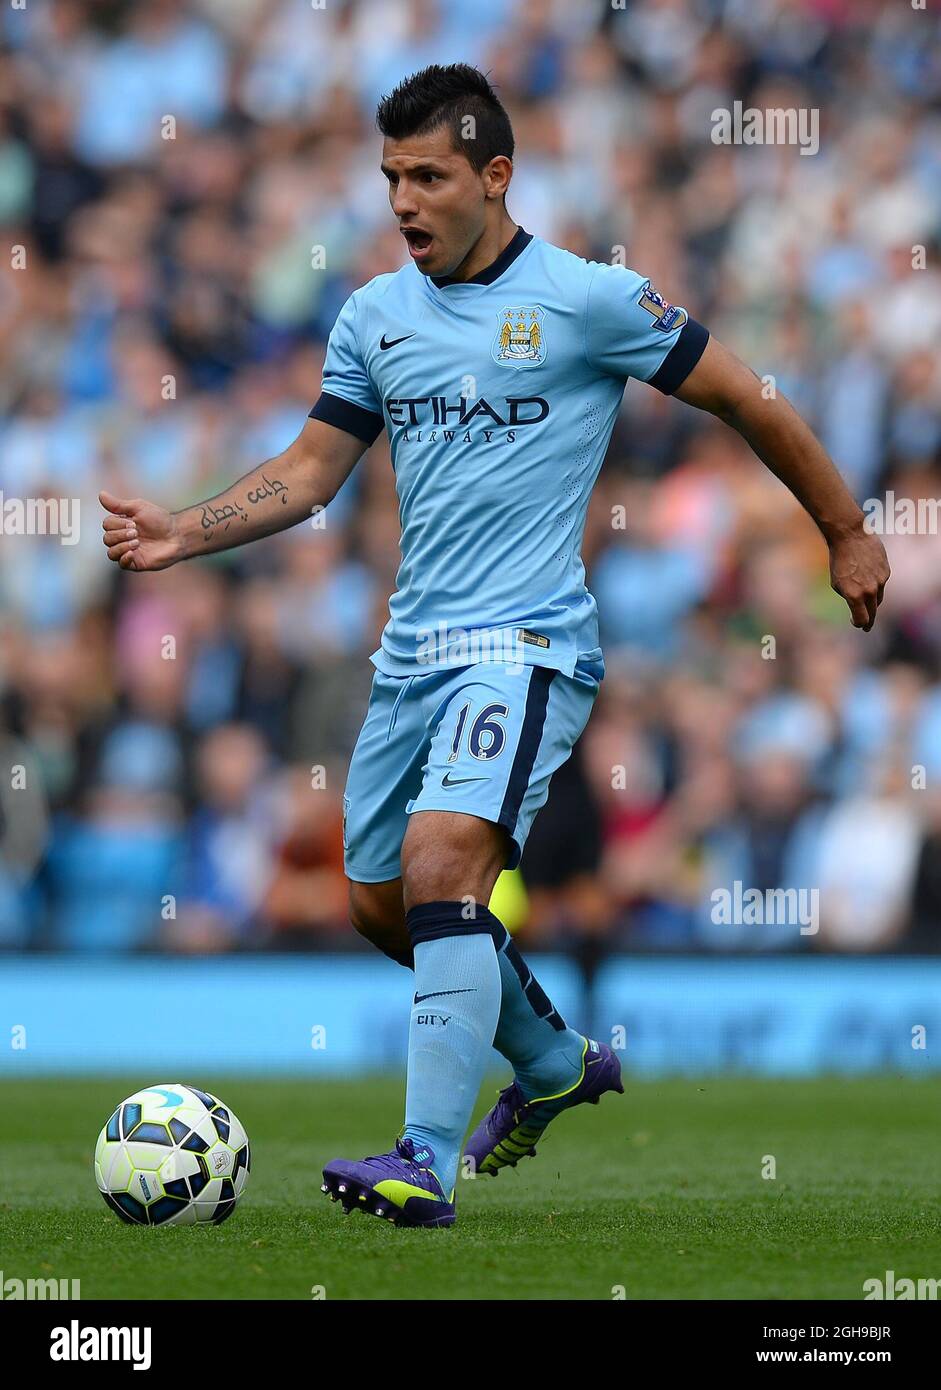 Sergio Aguero of Manchester City during the Barclays Premier League match between Manchester City and Stoke City in Etihad Stadium, Manchester on August 30, 2014. Picture Simon Bellis/Sportimage. Stock Photo